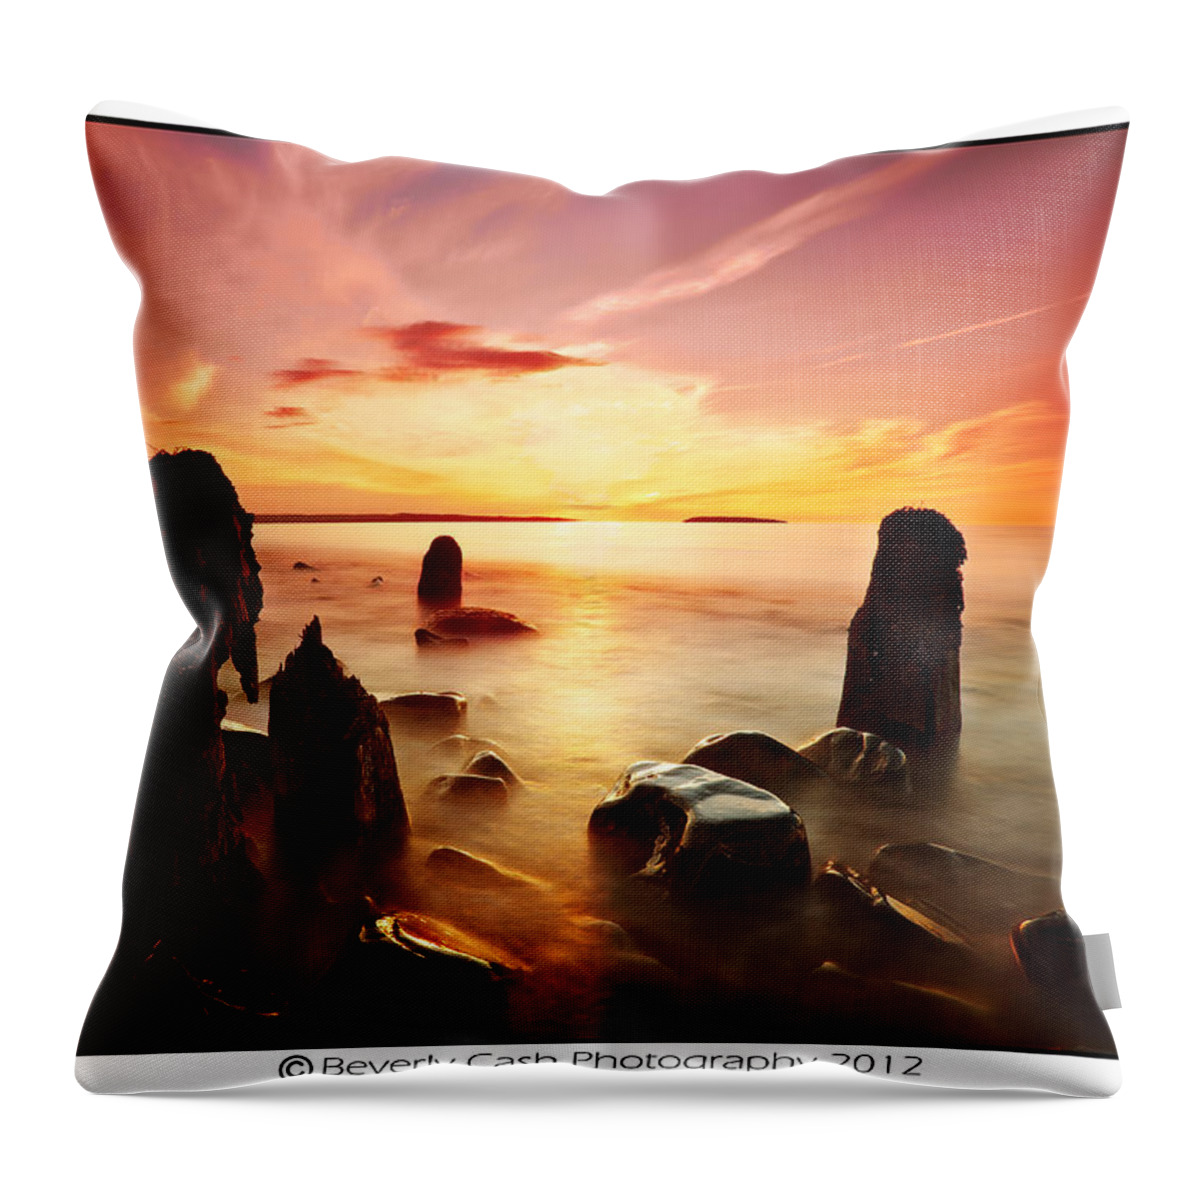 Sunset Throw Pillow featuring the photograph Fiery Sunset by B Cash